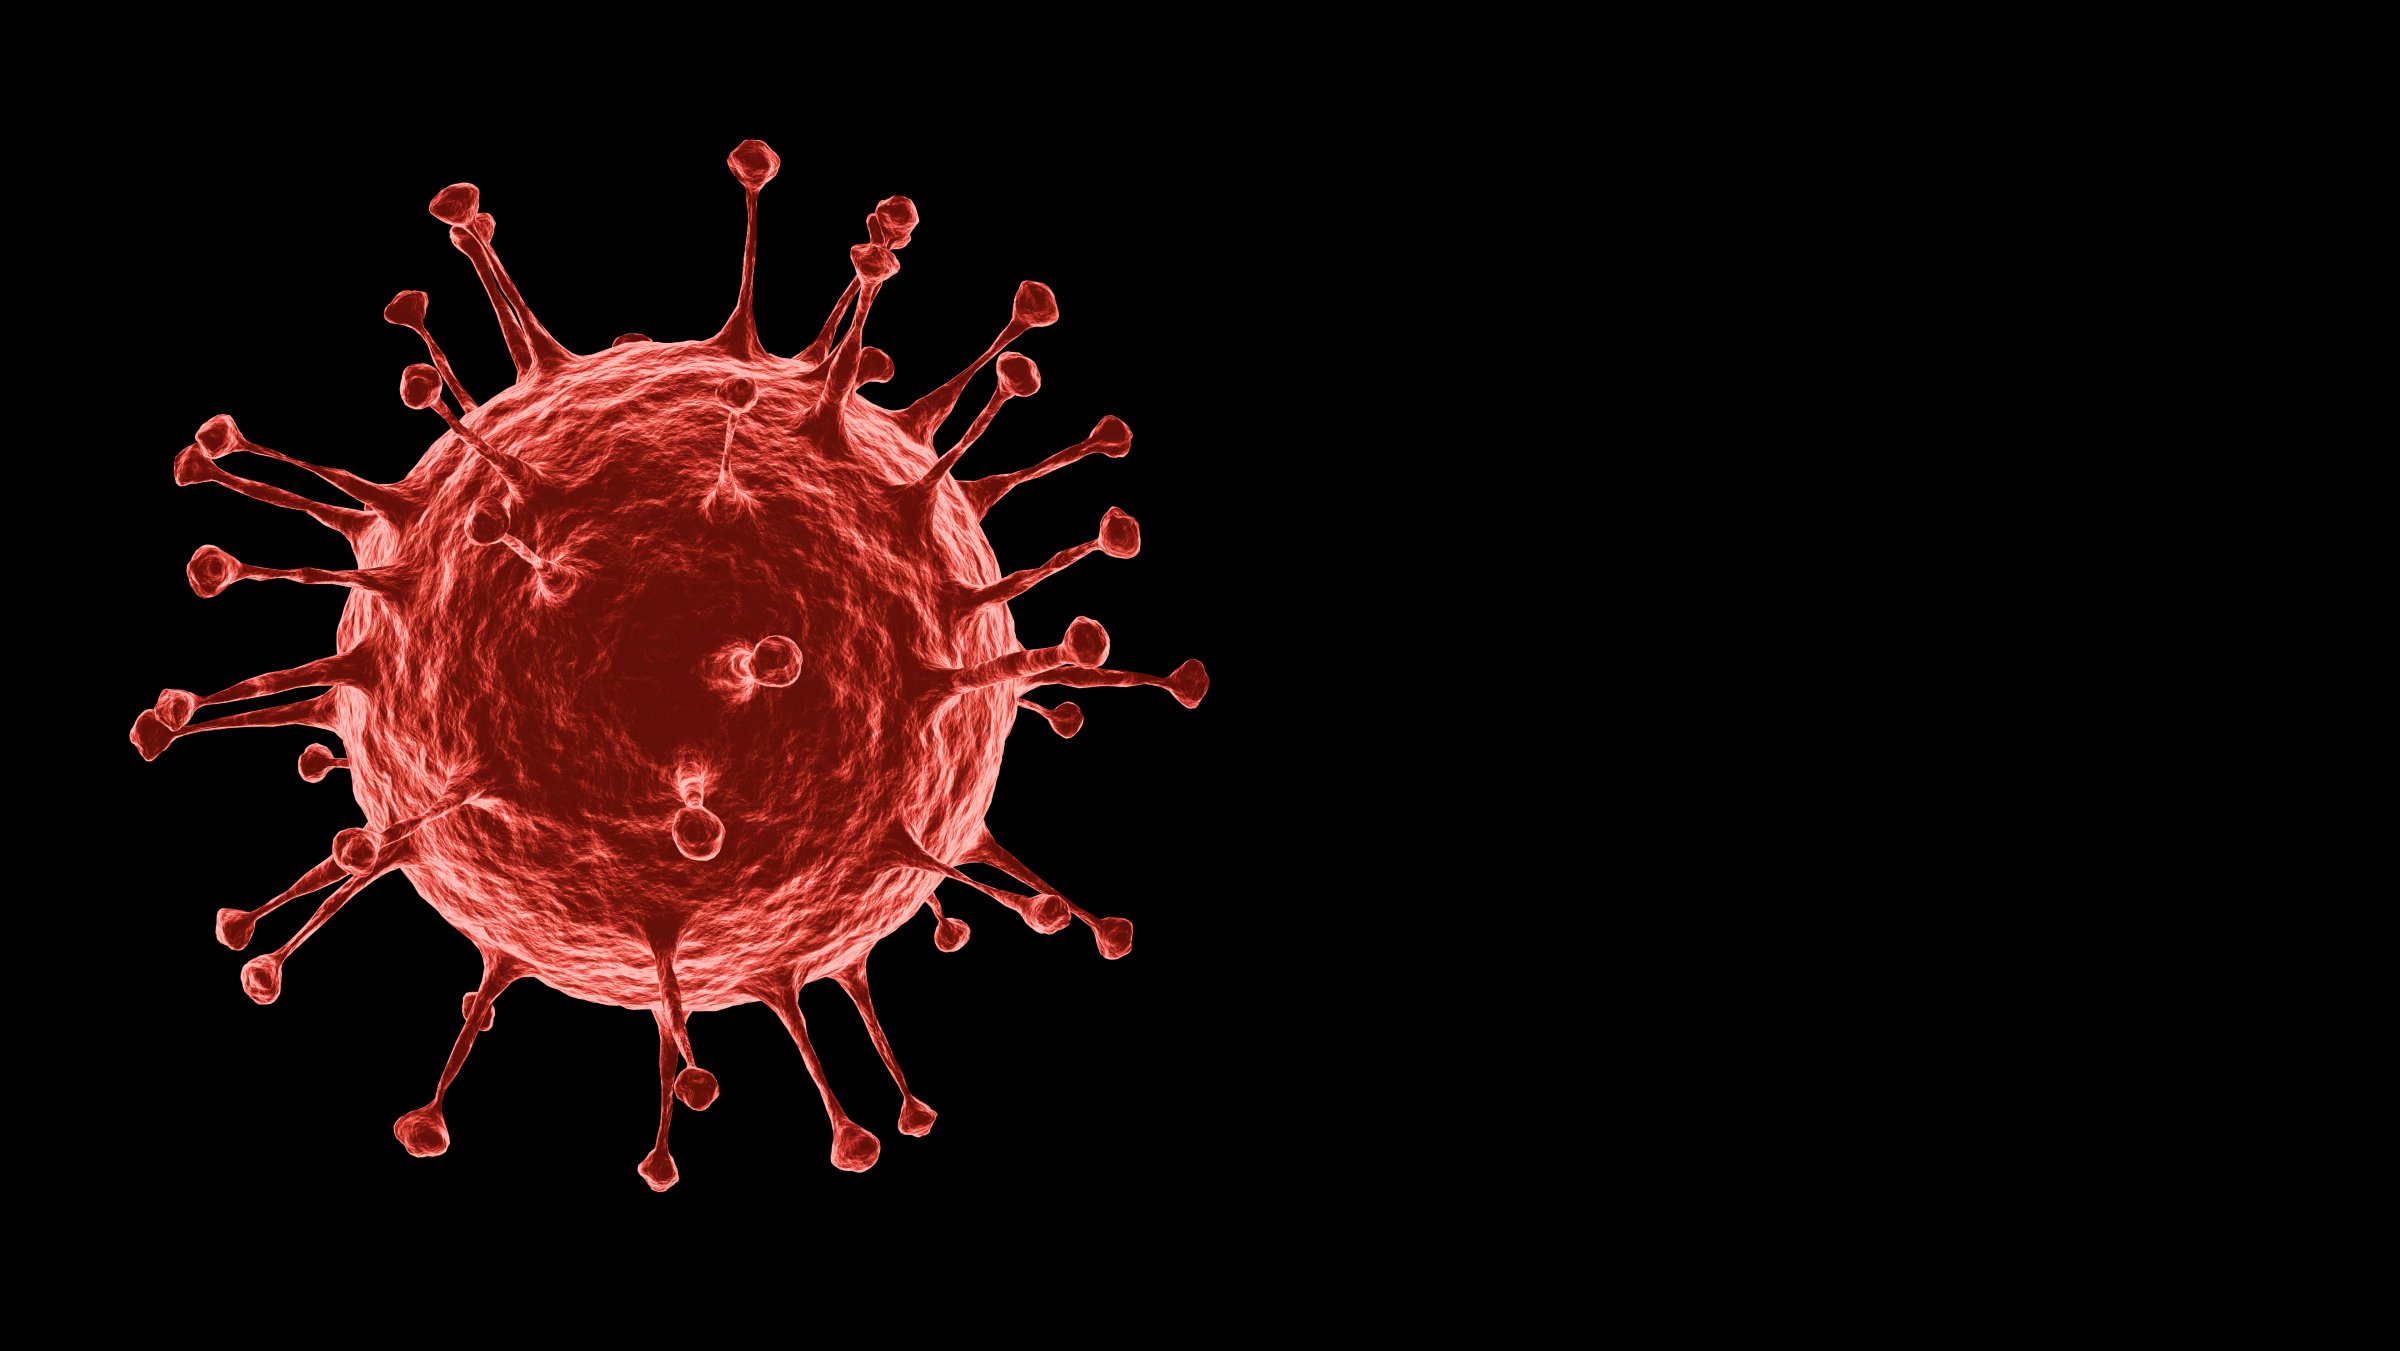 3D rendering Microscopic illustration of the spreading 2019 corona virus or Covid-19 on alpha layer black Background